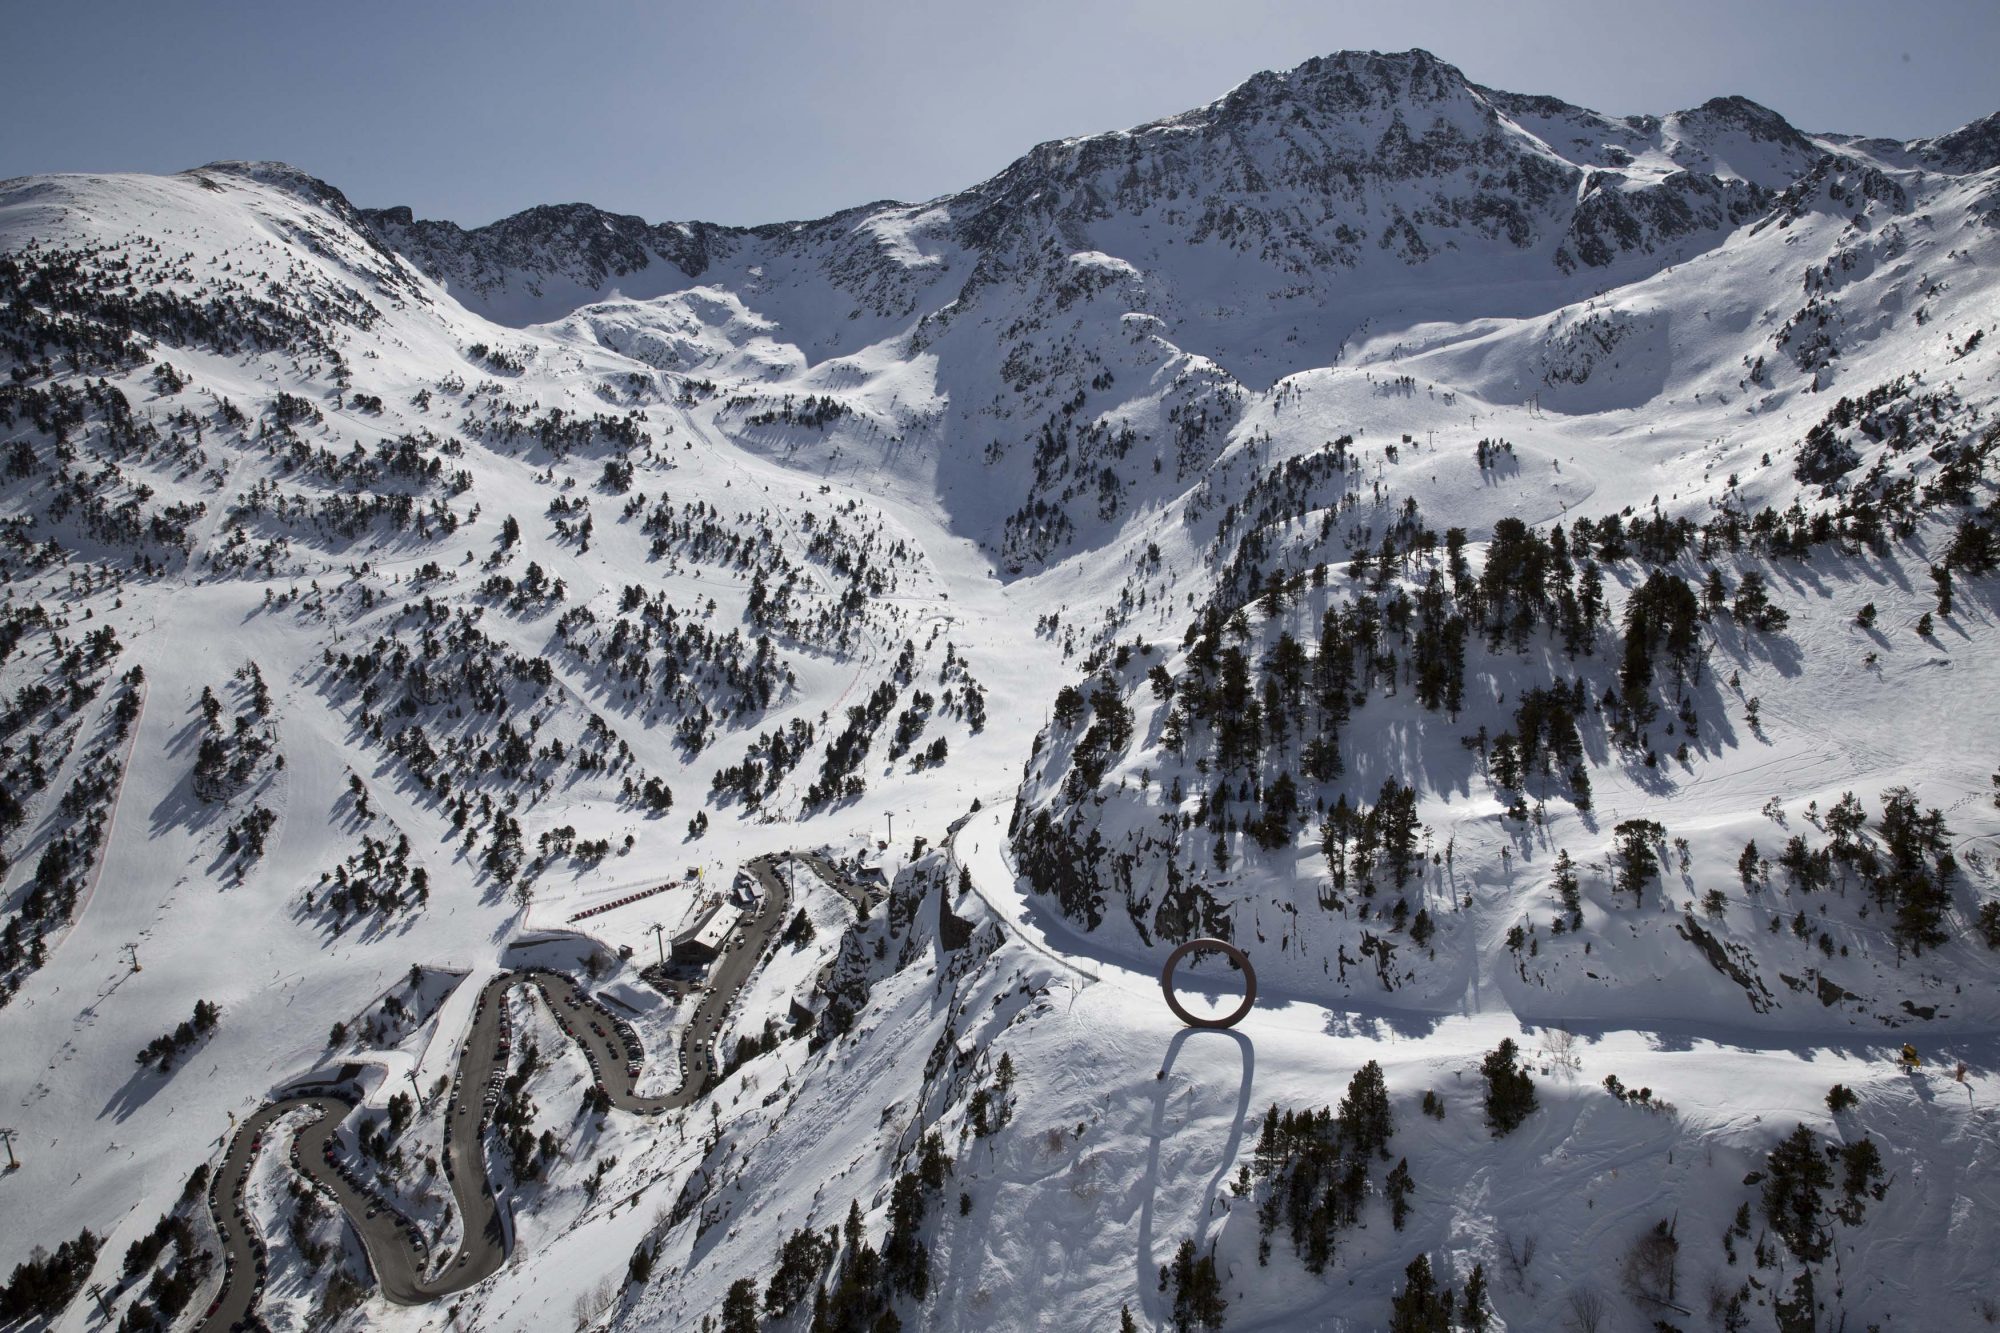 Ordino Arcalis aereal picture. Ordino leaves Vallnord to integrate fully with Grandvalira.